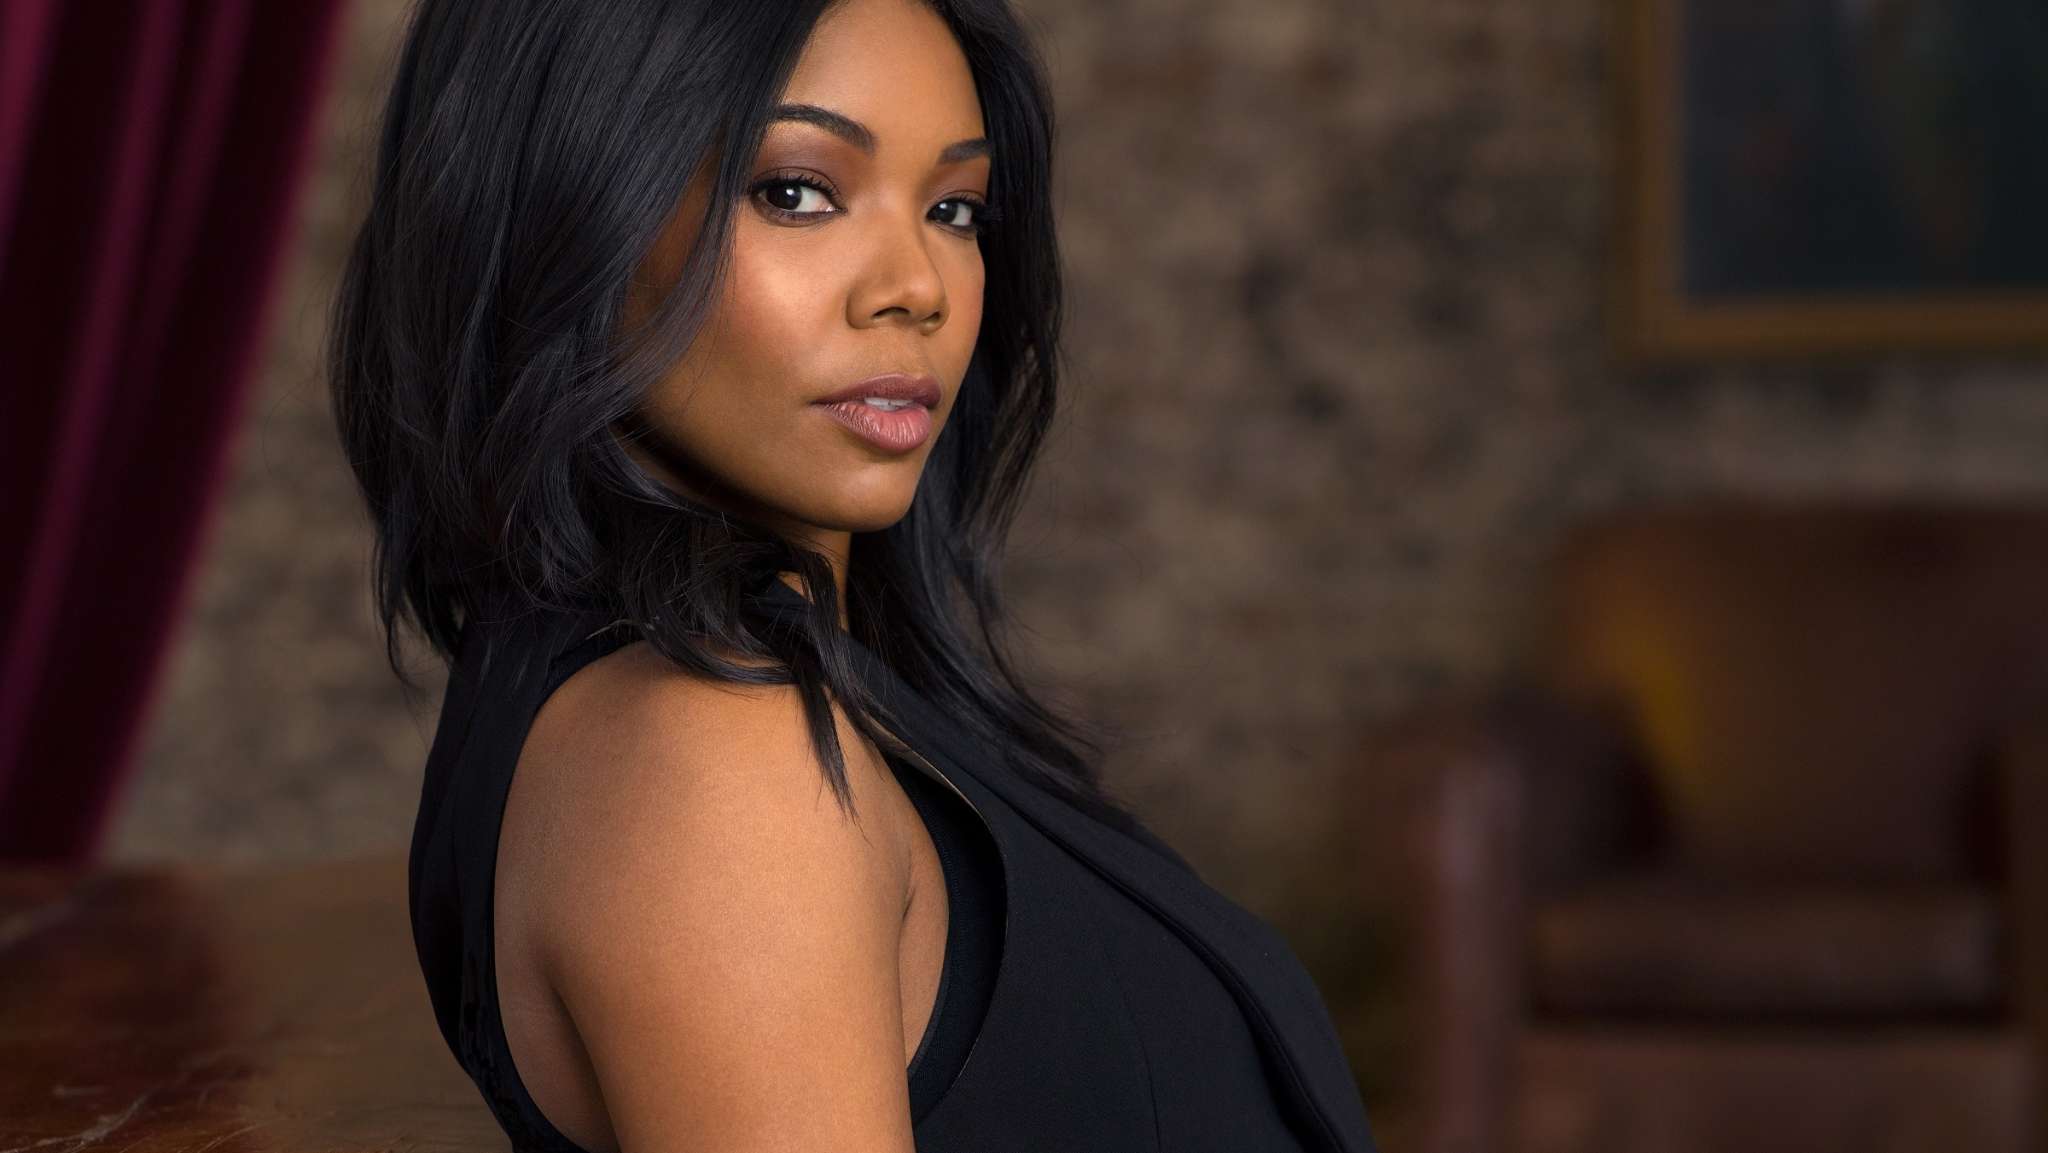 Gabrielle Union's Video Featuring Kaavia James Has Fans Excited - See It Here